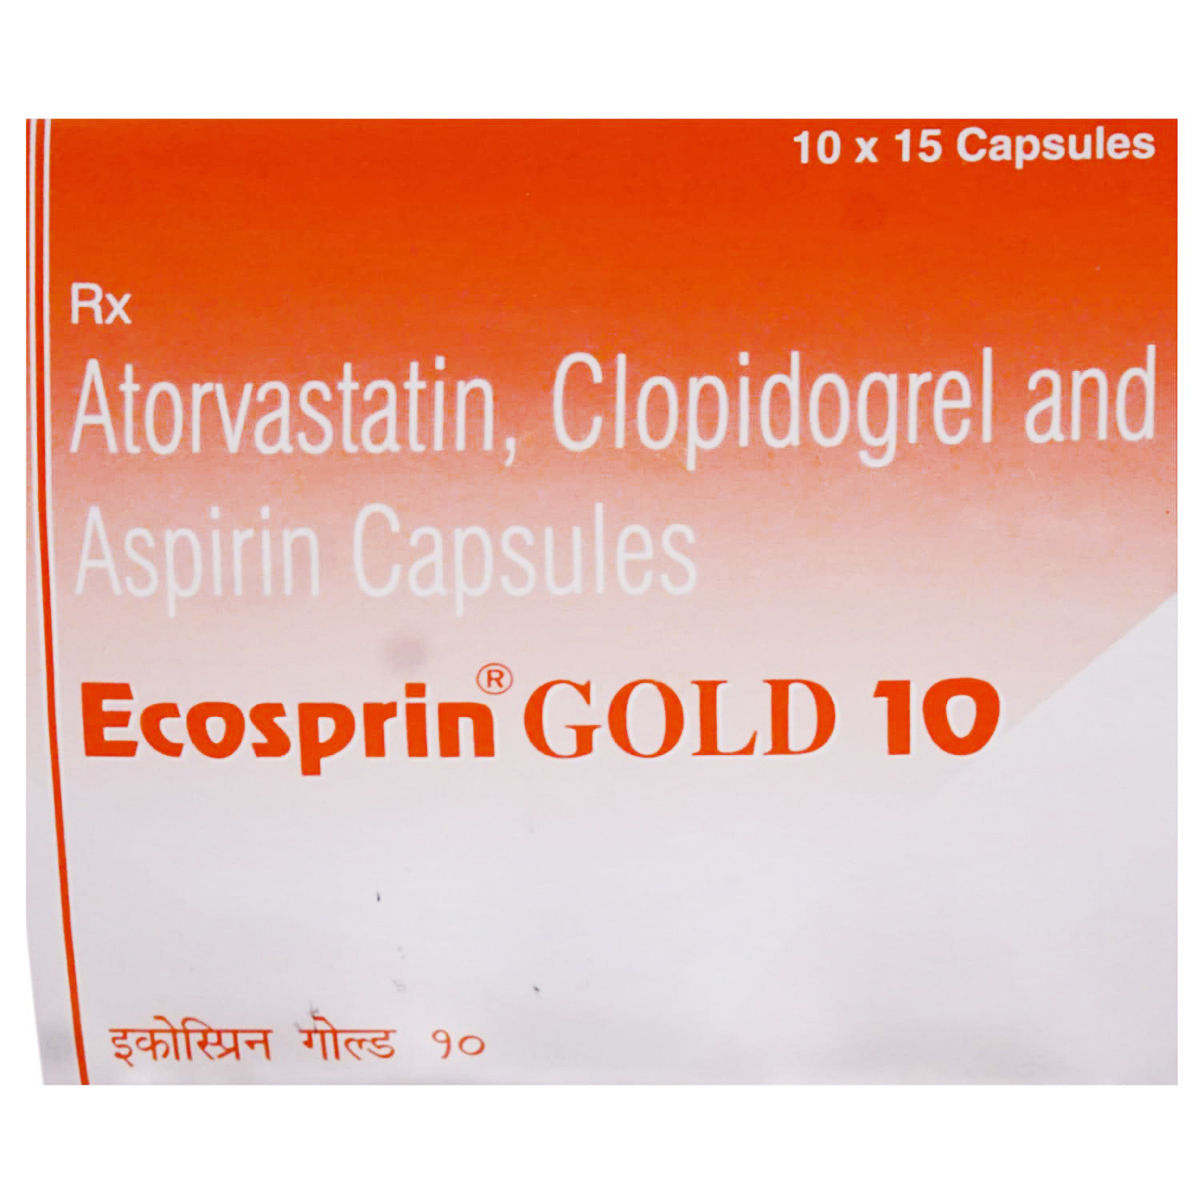 Ecosprin Gold 10 Capsule 15's, Pack of 15 CAPSULES